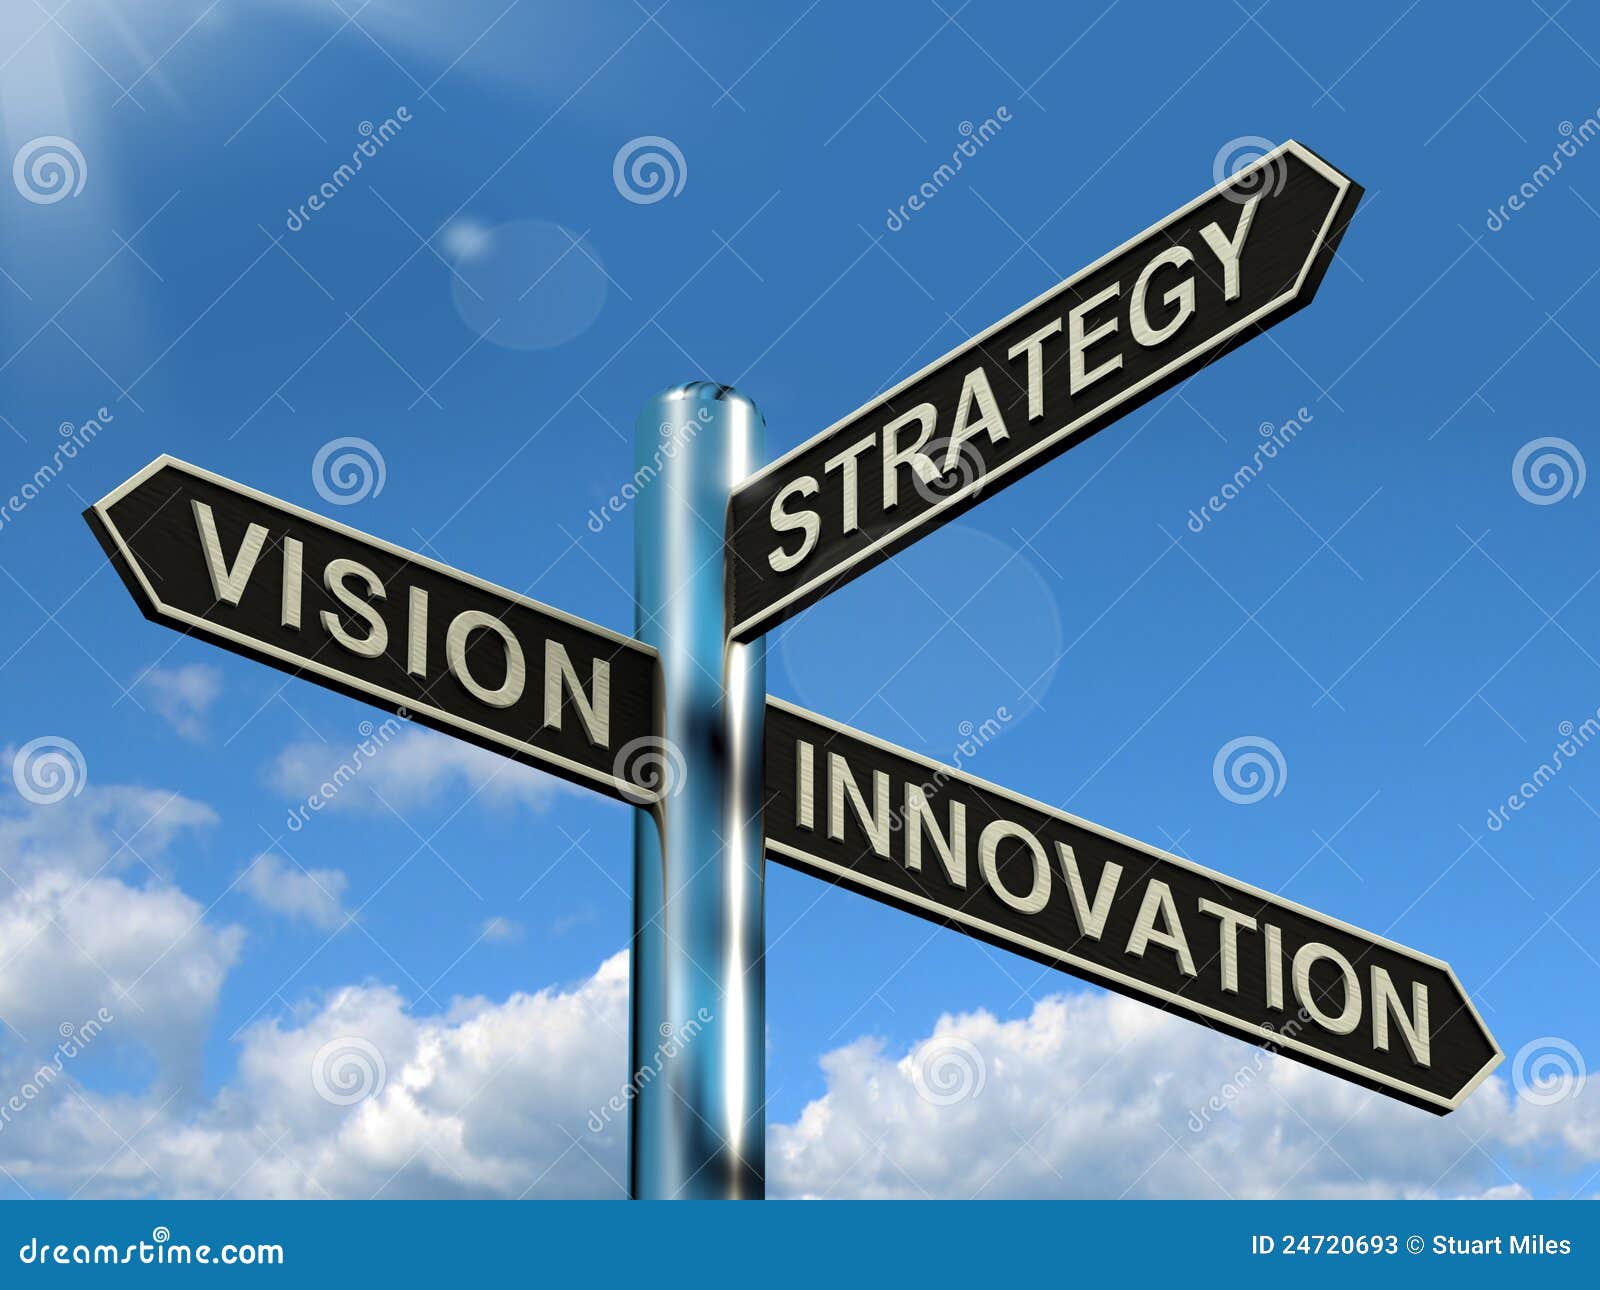 Vision Strategy Tools Execution Goal People Rising To ...